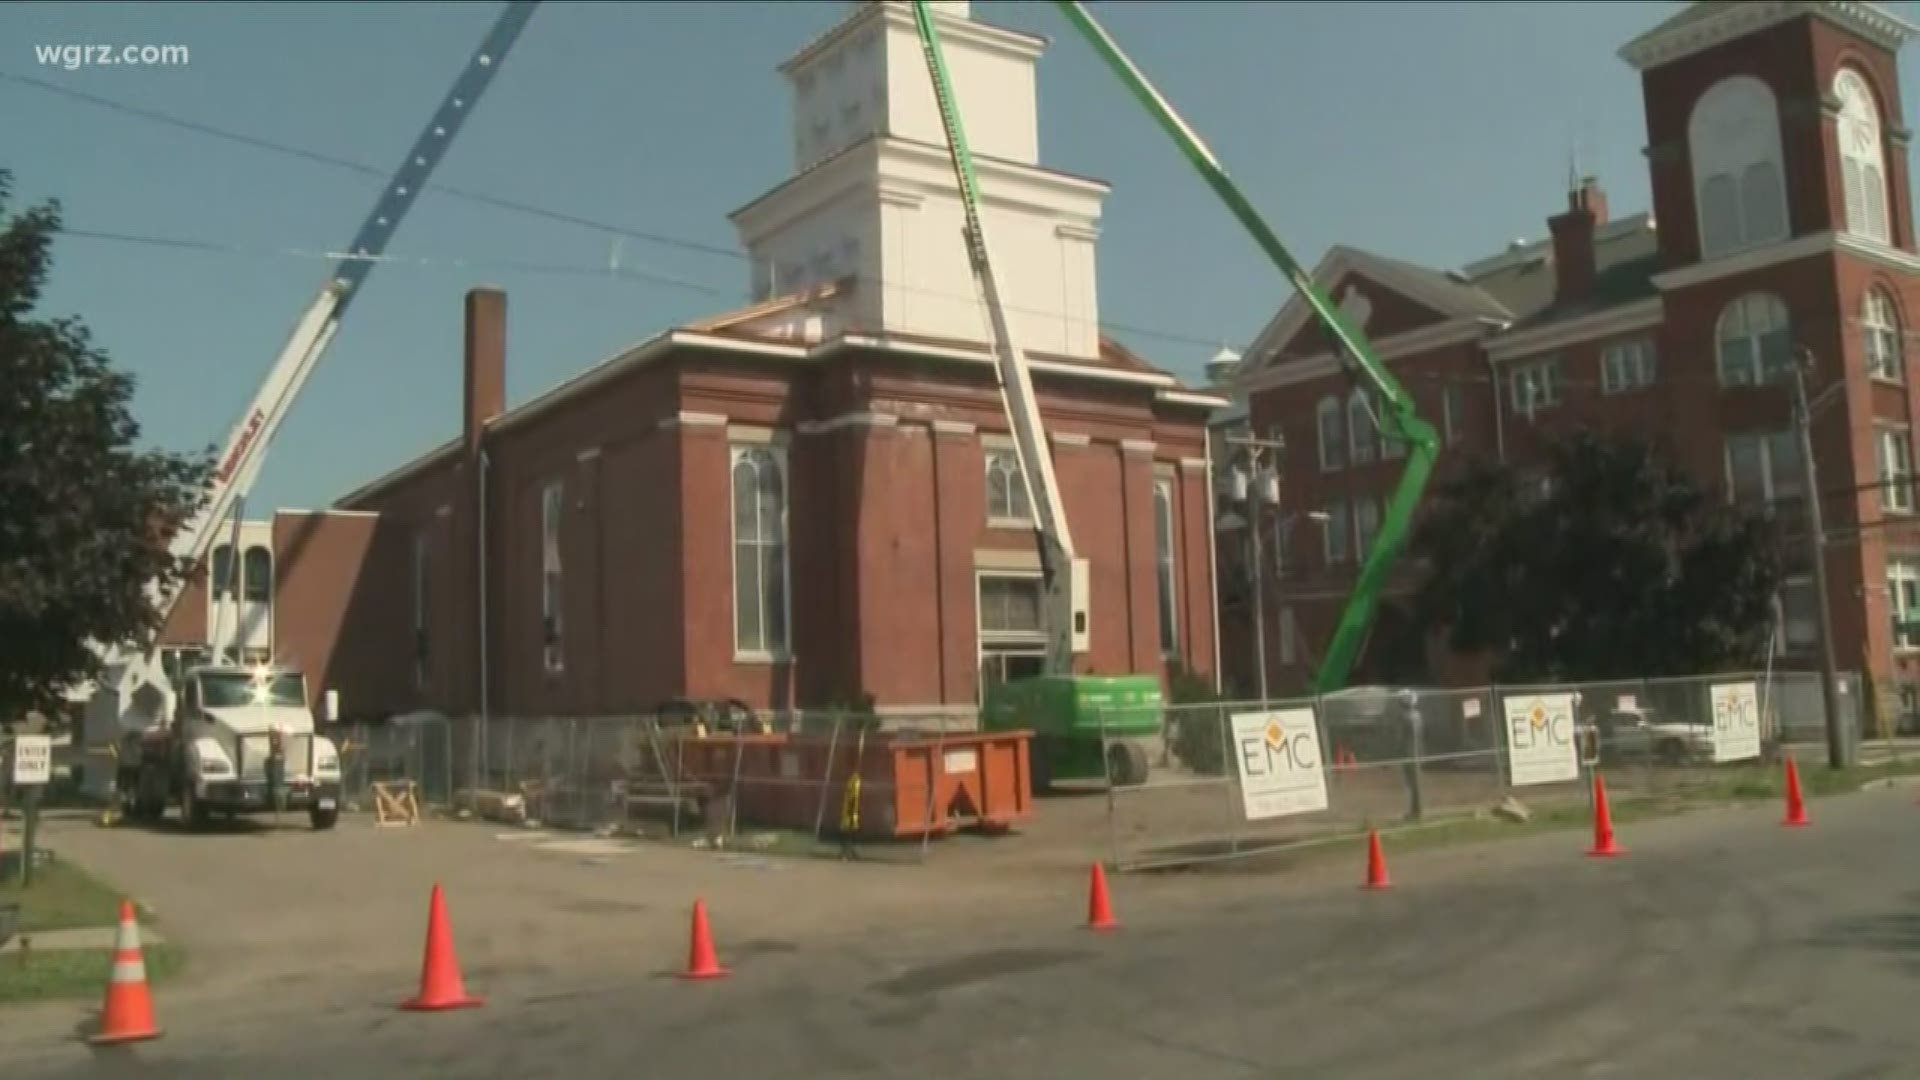 THE AREA AROUND THE CHURCH WILL BE CLOSED OFF WHILE CONSTRUCTION IS TAKING PLACE.